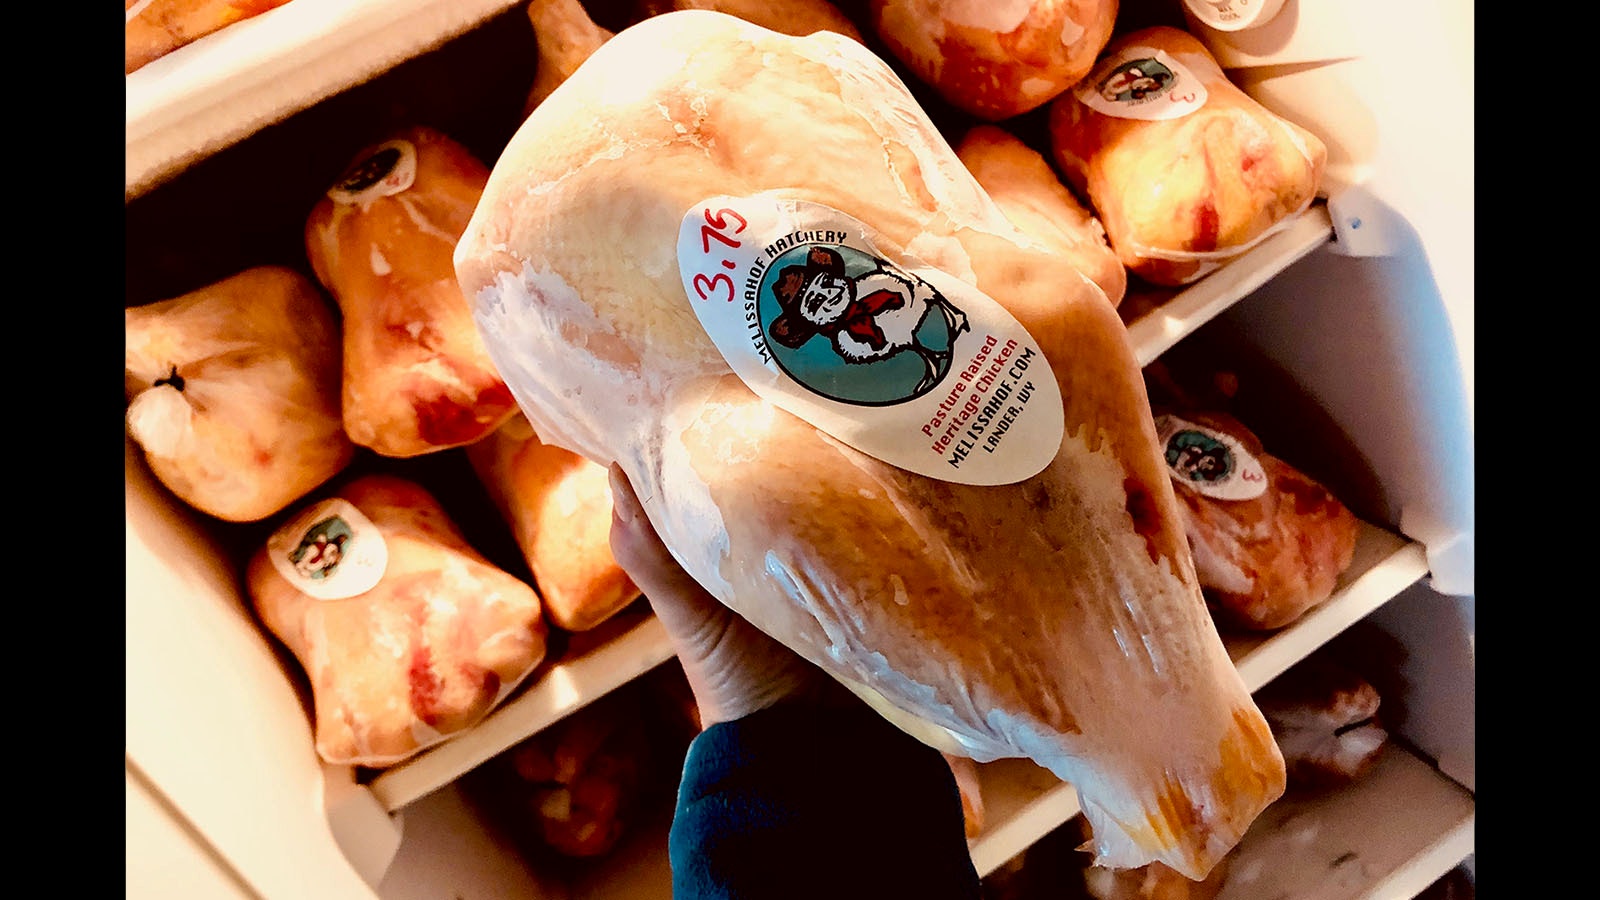 Packaged whole chicken from Melissahof Farm.